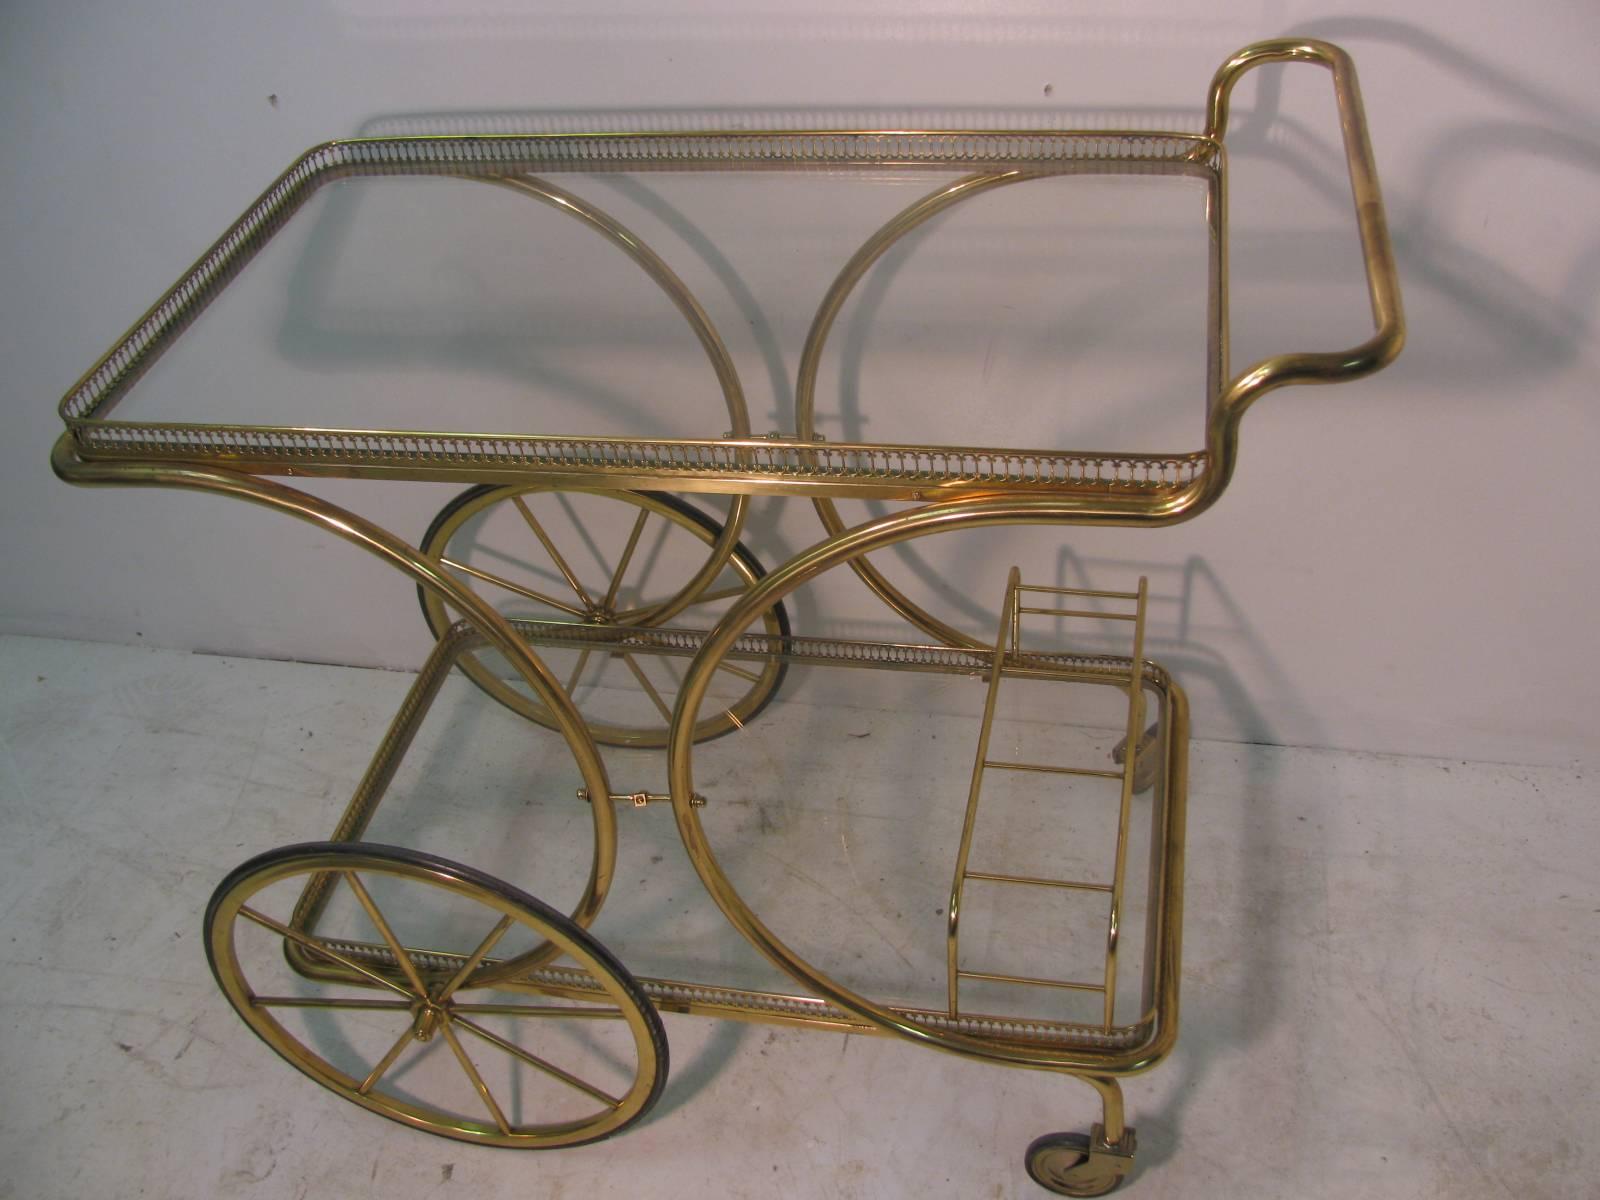 Sculptural brass with a pierced apron surrounding two shelves and a triple bottle holder. Large wheels with rubber tires for smooth gliding. Top shelf height is 26.5, shelf is 15.5 x 27.25.